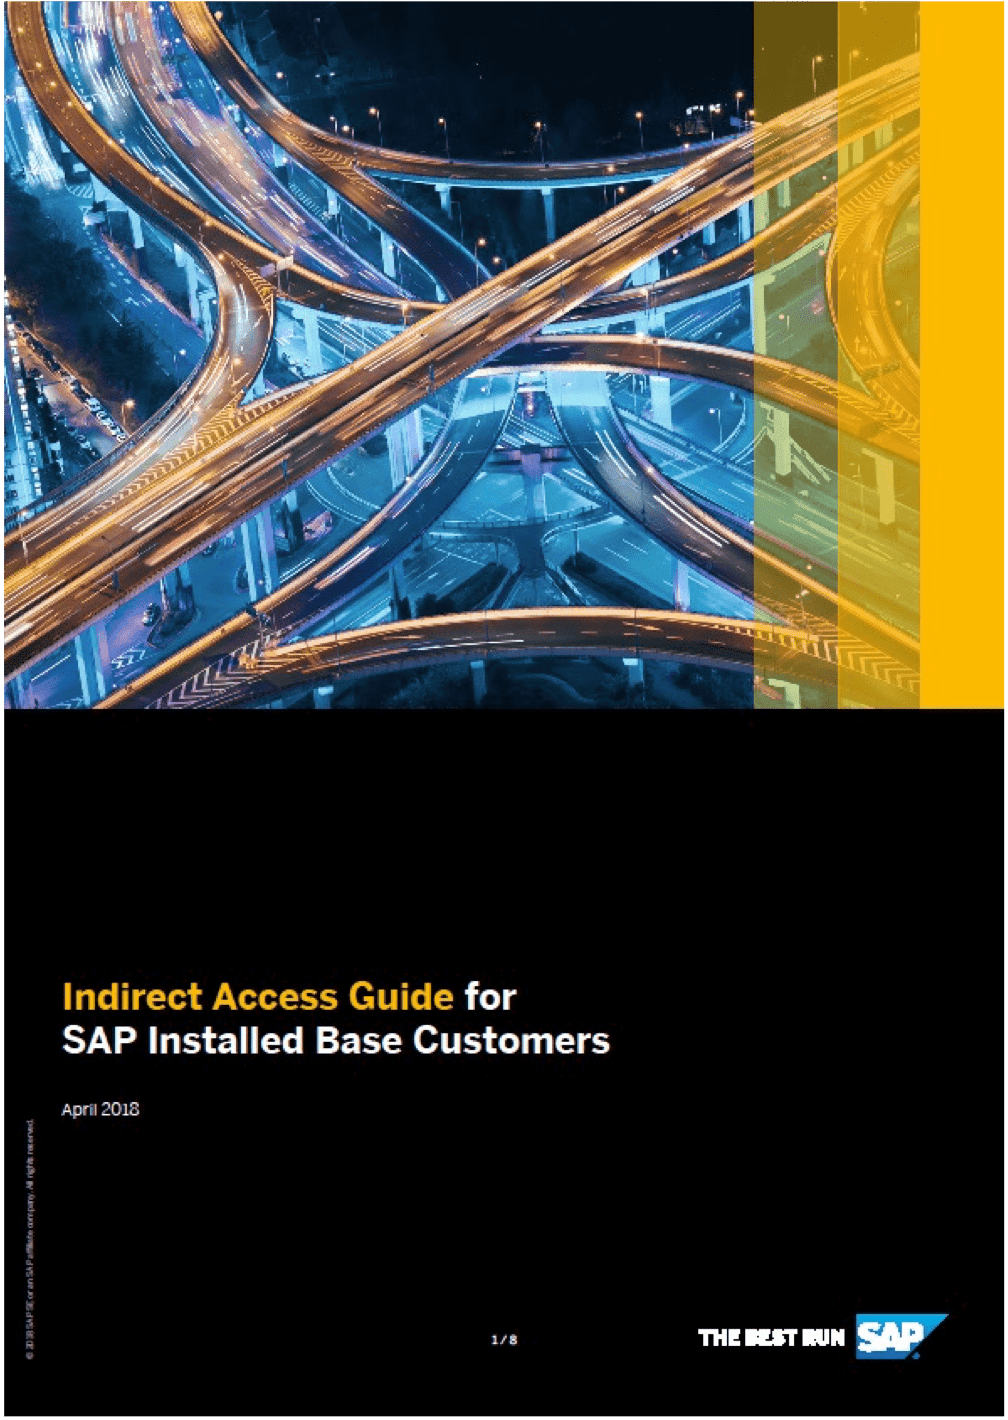 SAP Indirect Access - Old model